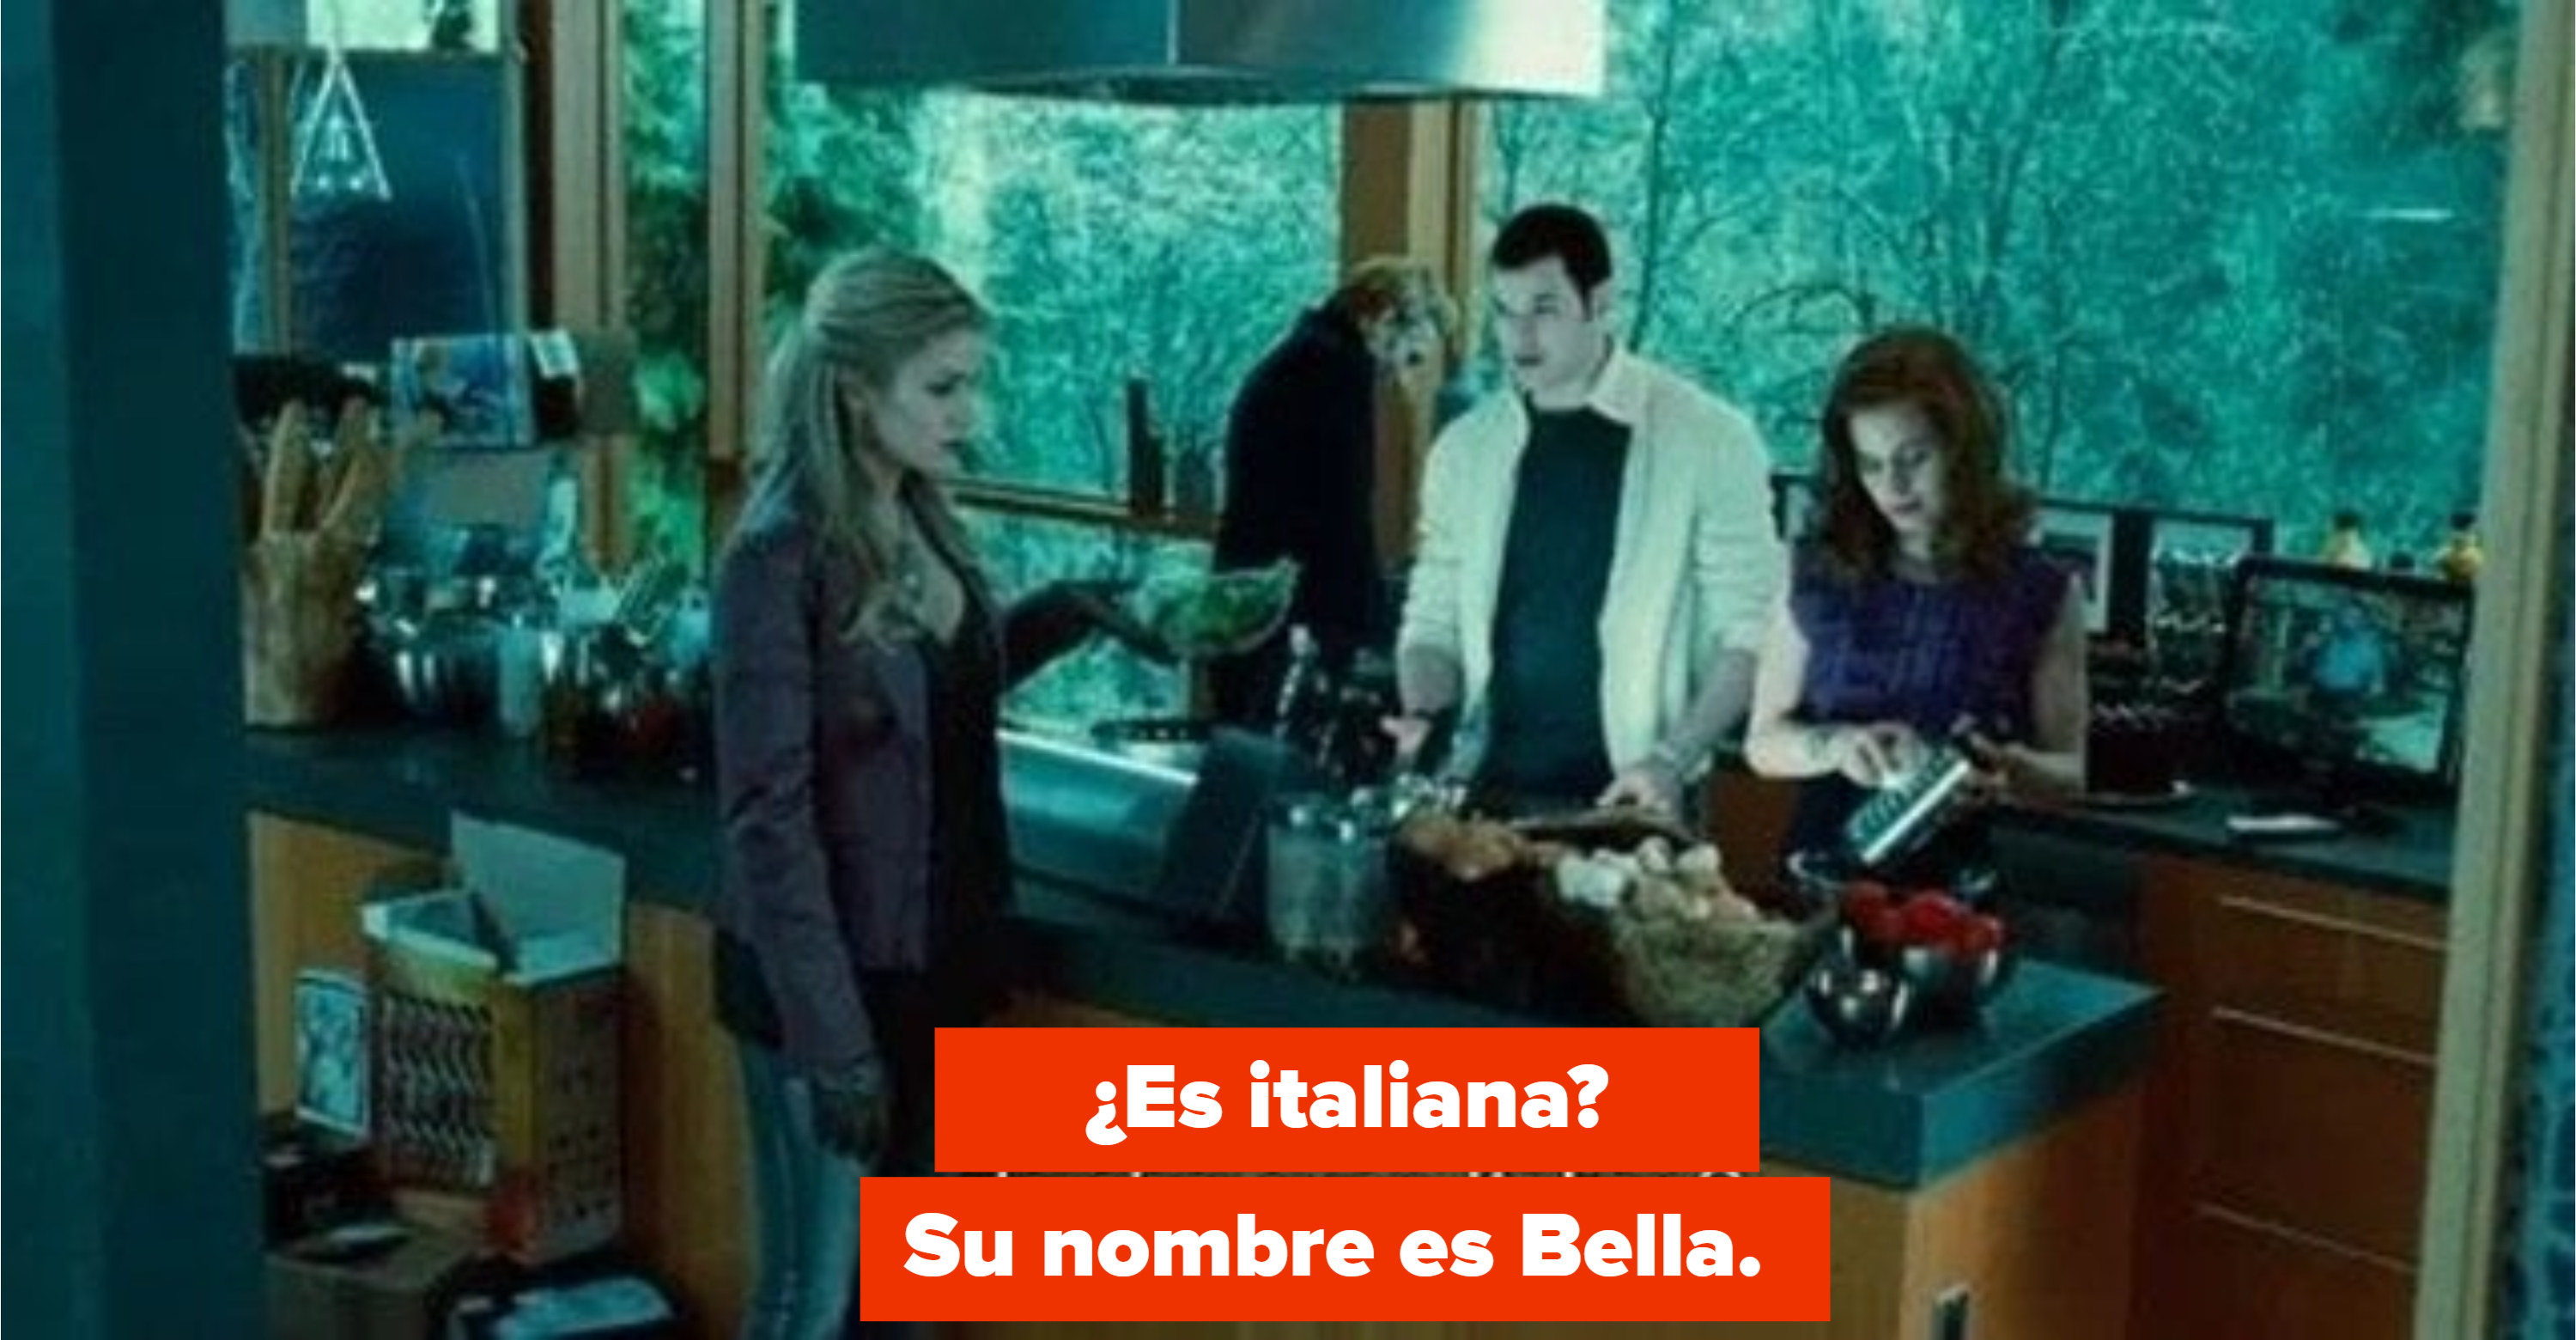 &quot;Is she even Italian?&quot; &quot;Her name is Bella&quot;